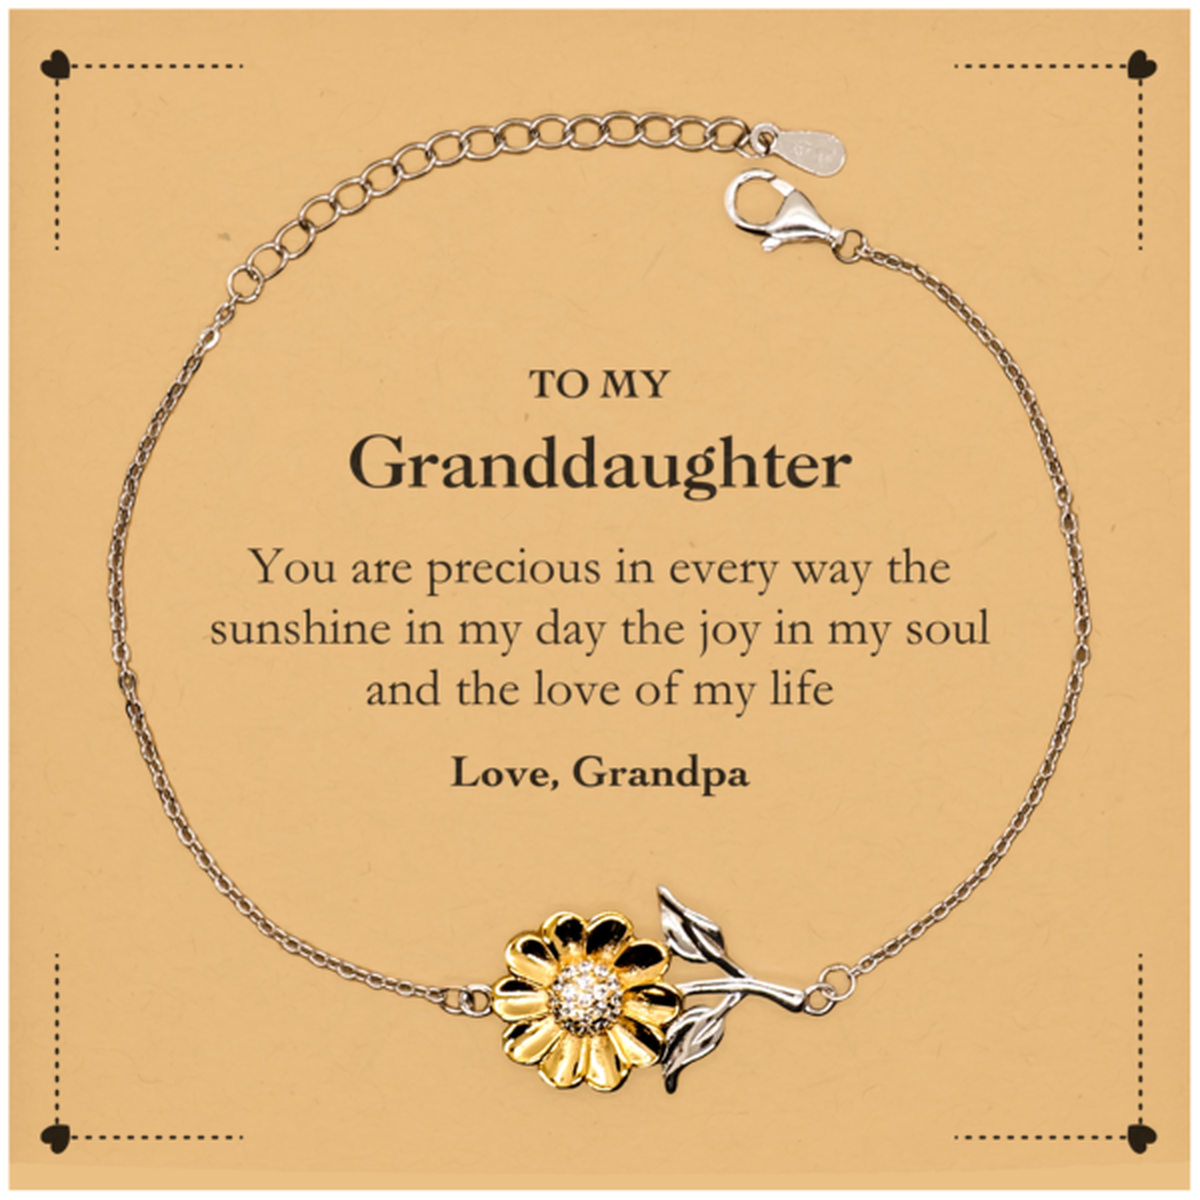 Graduation Gifts for Granddaughter Sunflower Bracelet Present from Grandpa, Christmas Granddaughter Birthday Gifts Granddaughter You are precious in every way the sunshine in my day. Love, Grandpa